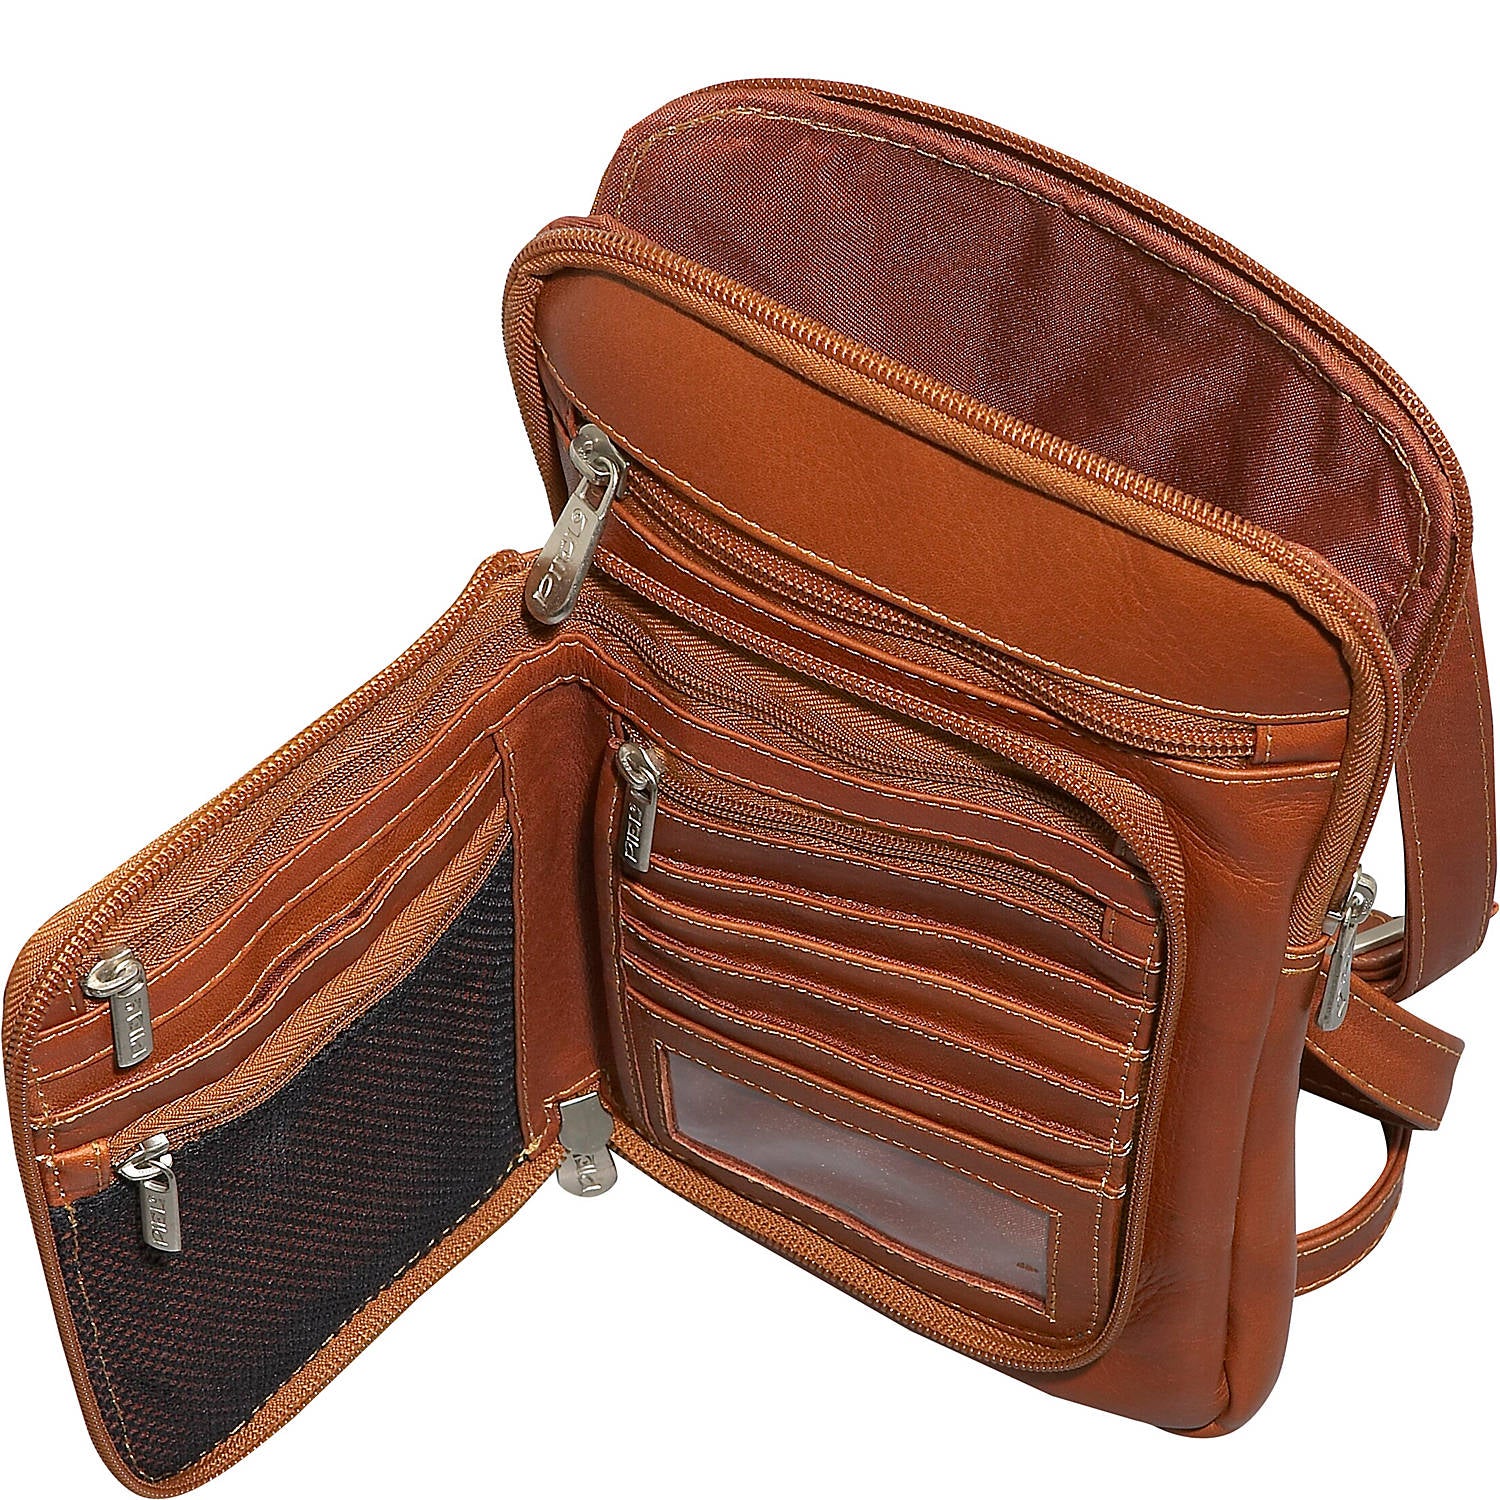 Dustproof Travel Accessories Double Sided Leather Organizer